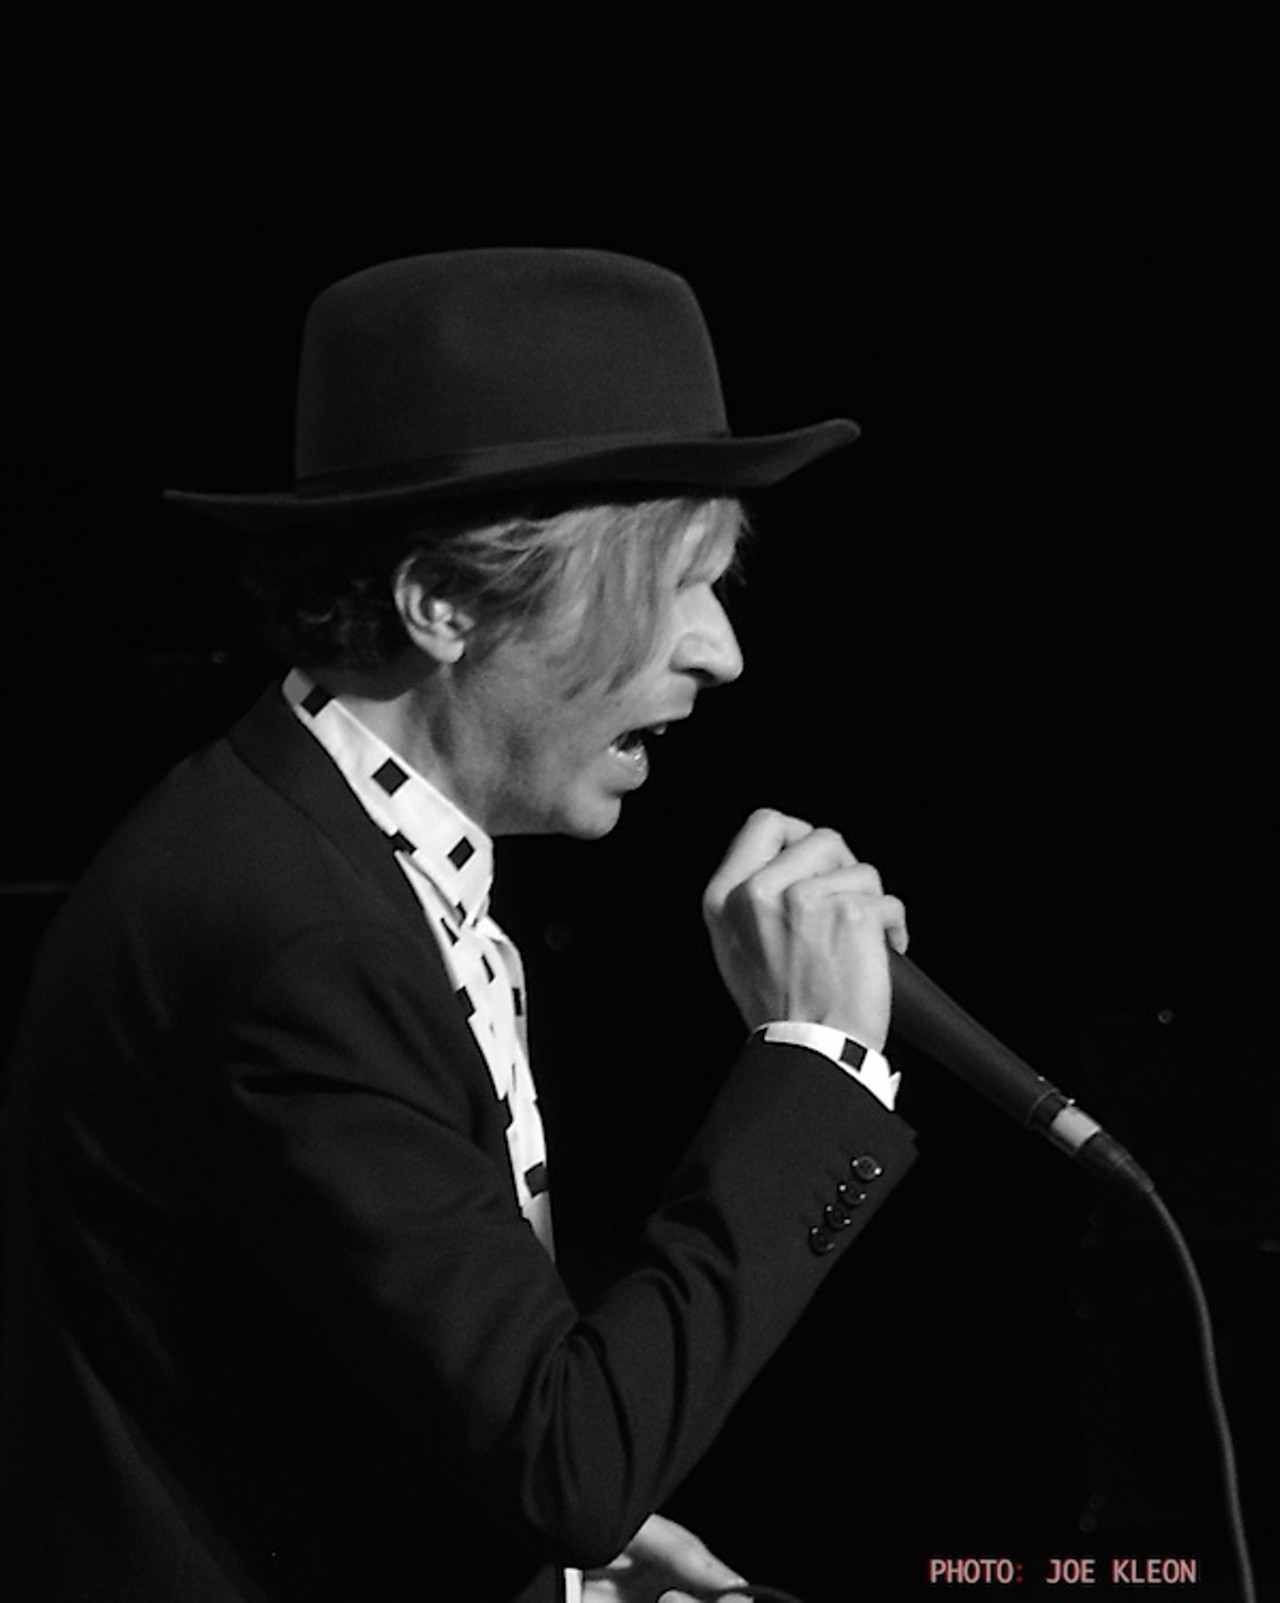 Beck Performing at the State Theatre